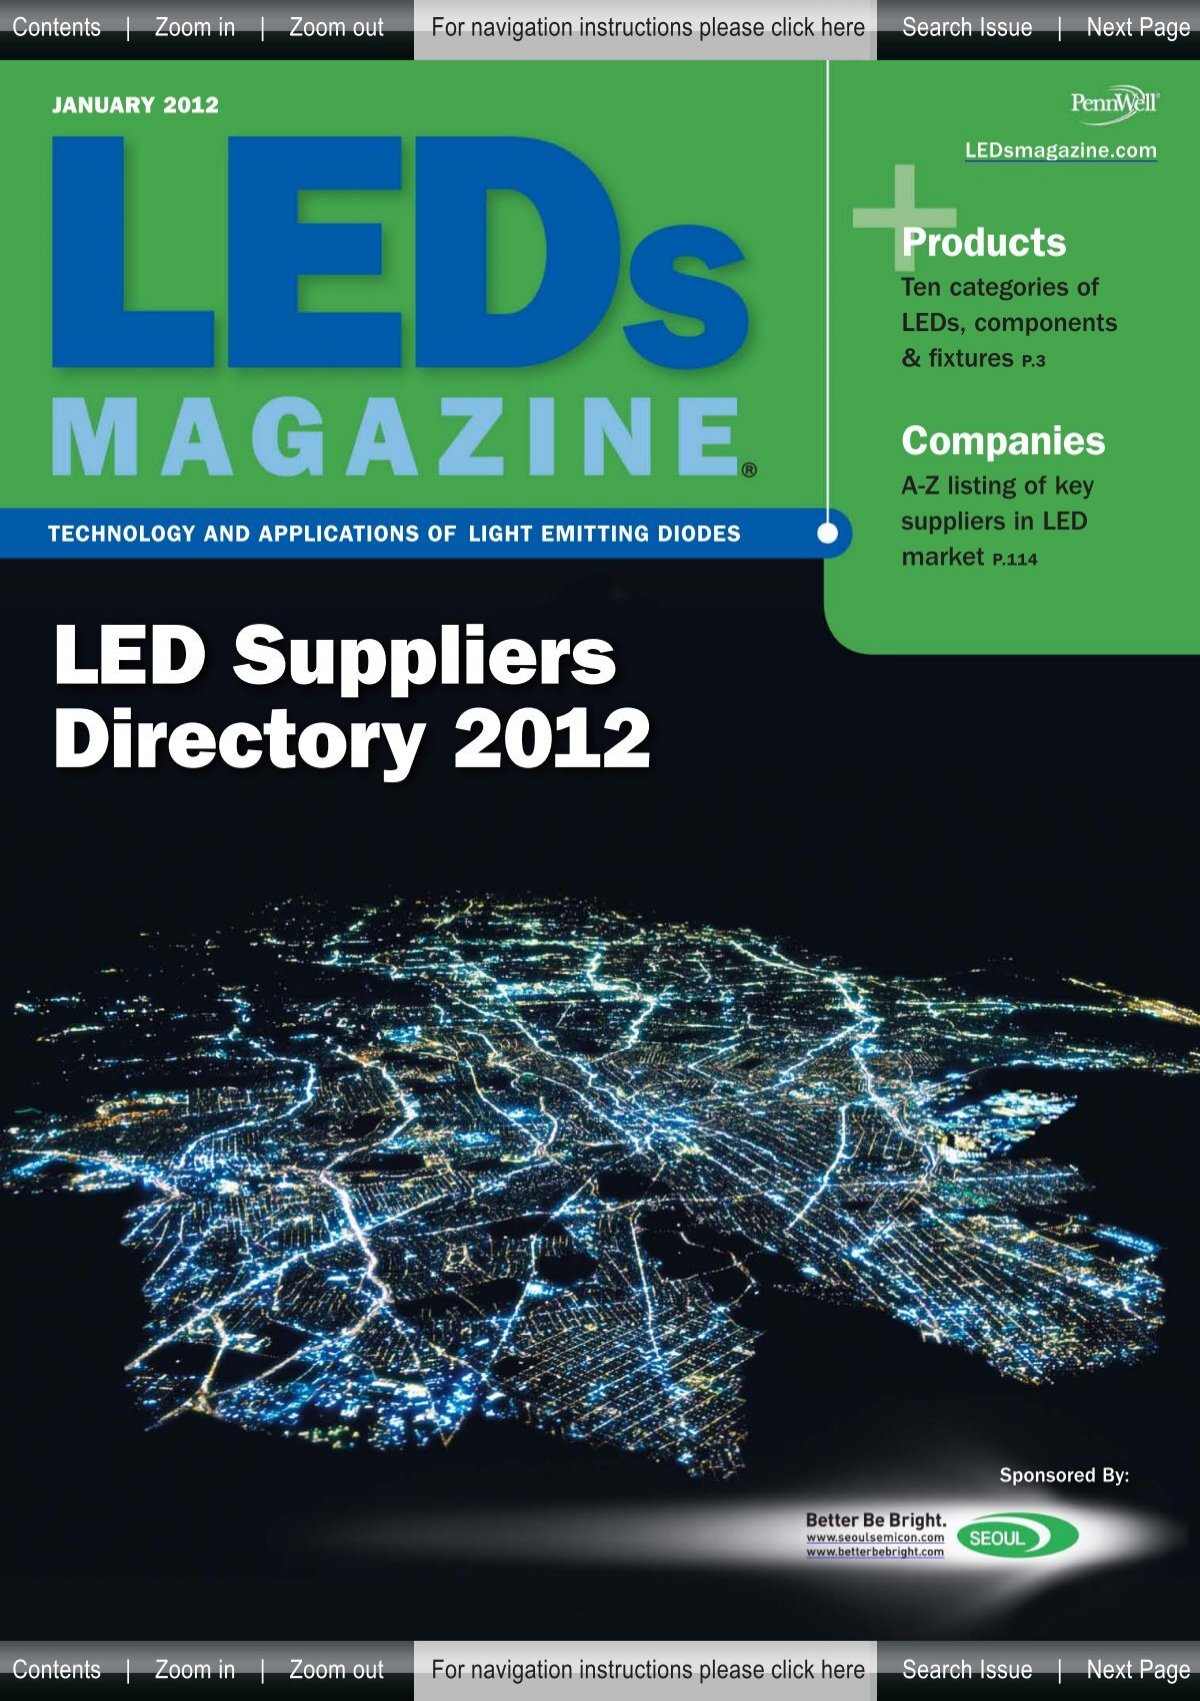 LED Suppliers Directory 2012